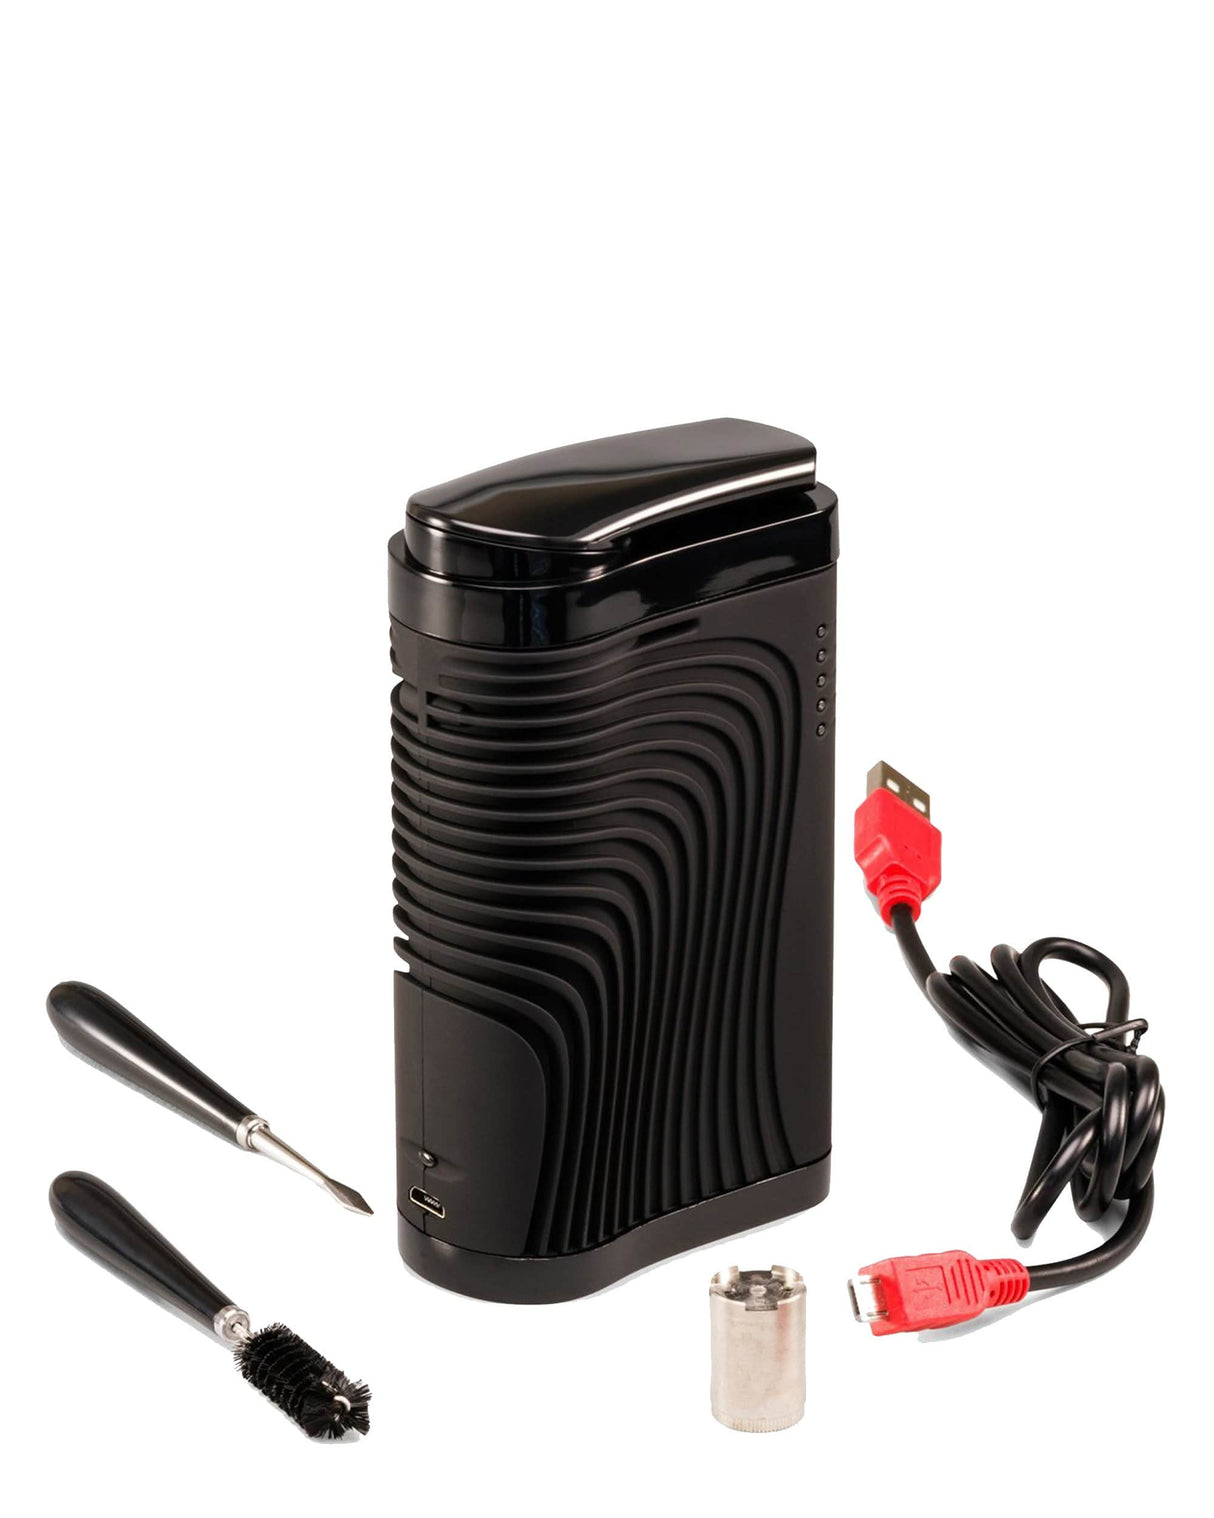 Boundless CF Vaporizer in black, portable design with USB cable and cleaning tools